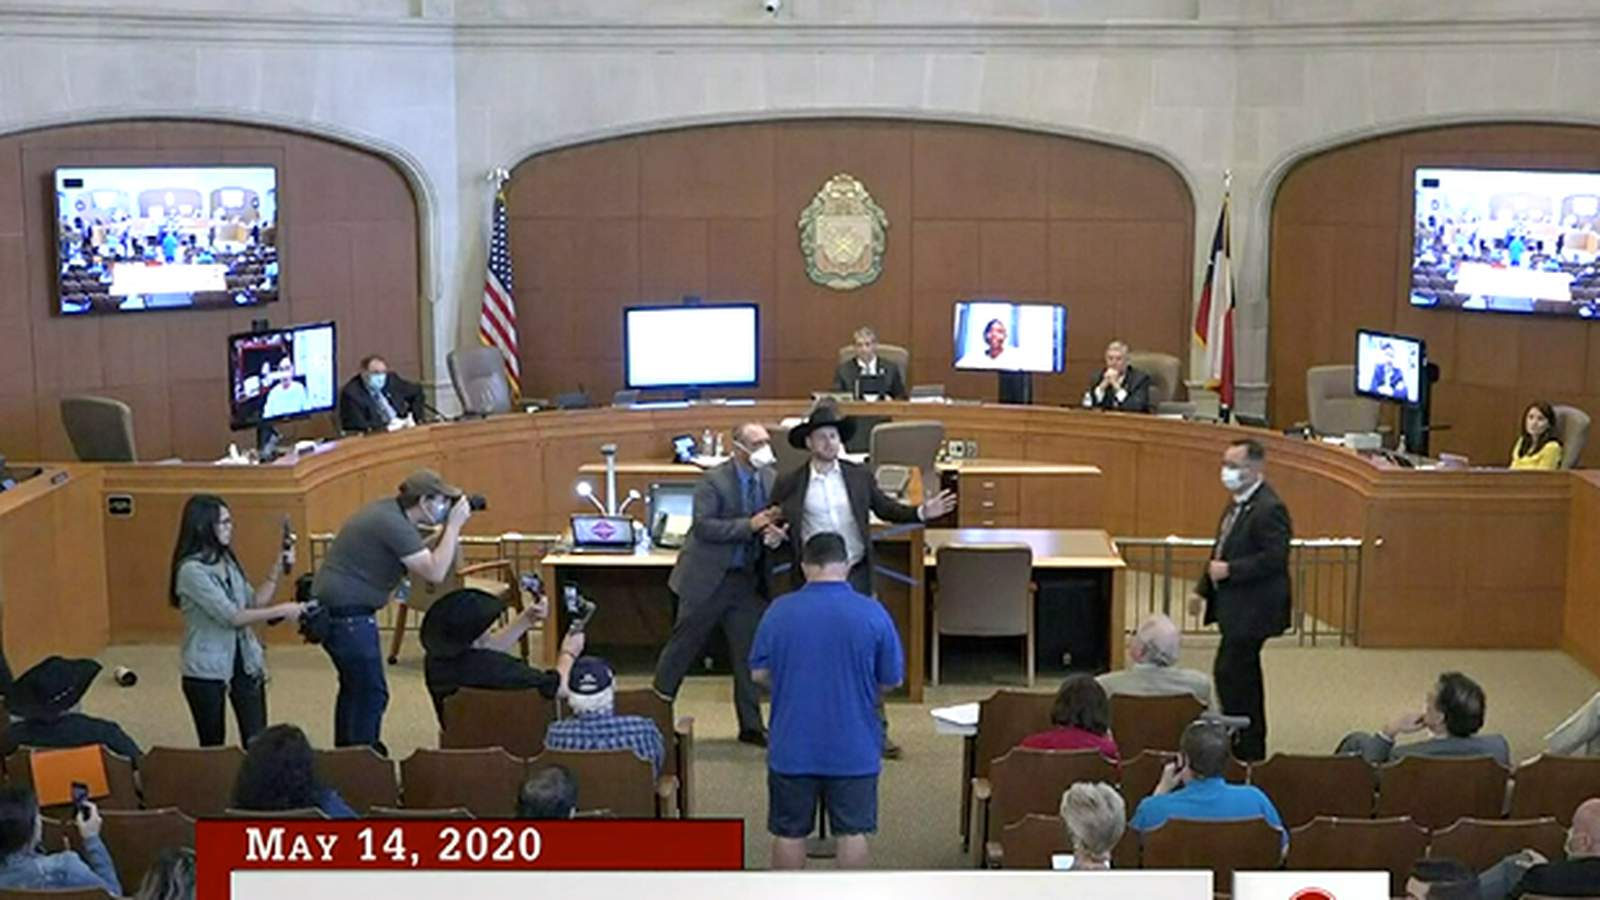 WATCH: Disturbance during City Council meeting, May 14, 2020